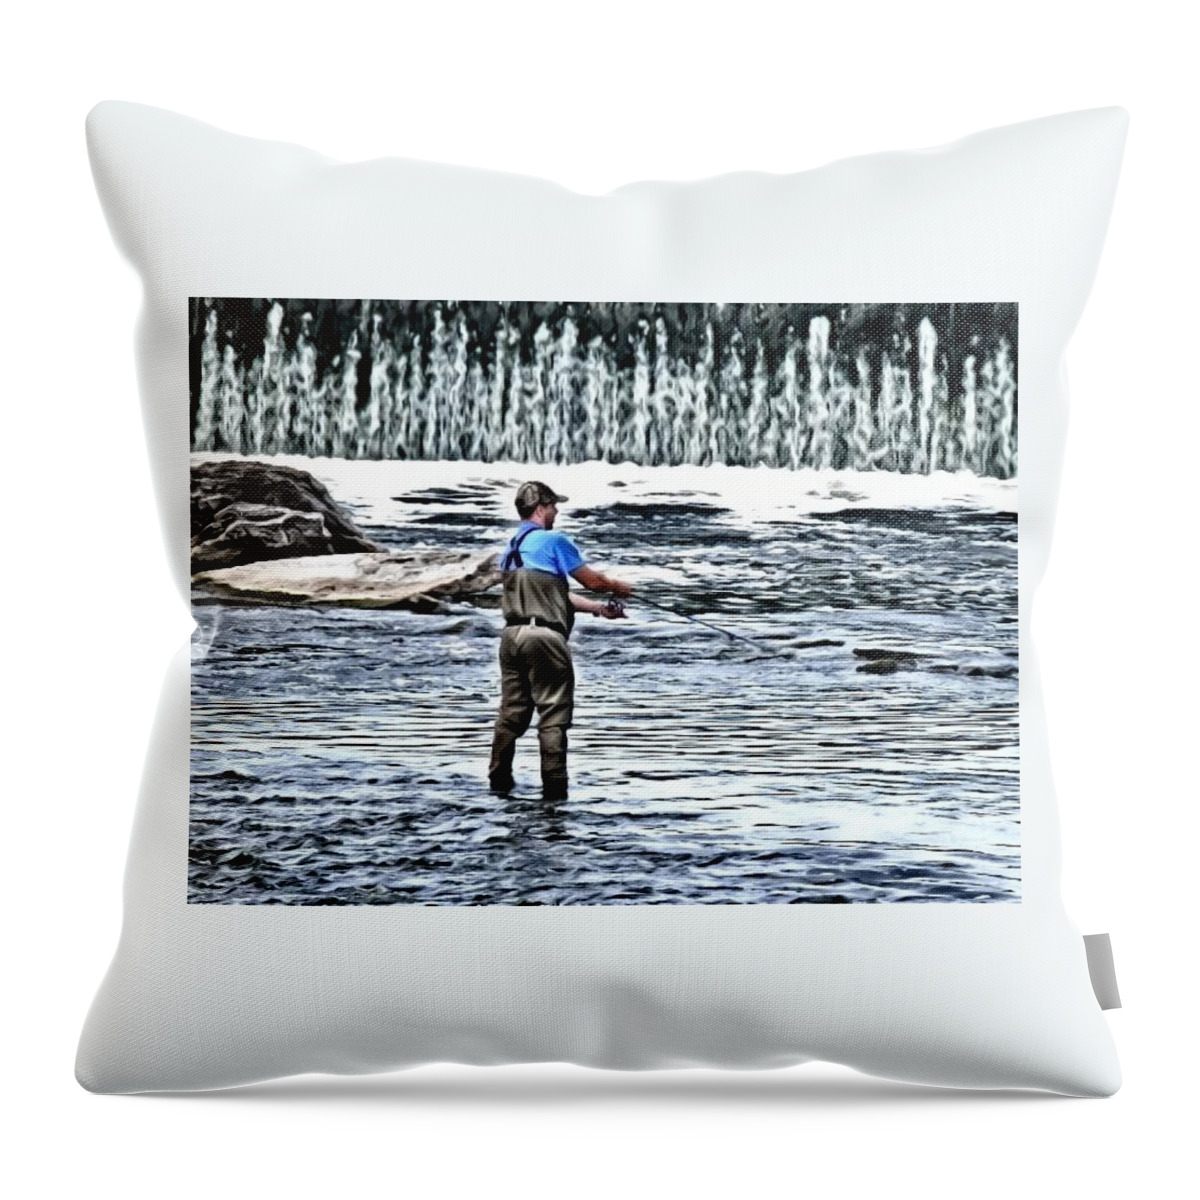 River Throw Pillow featuring the photograph Fisherman on the River by Deborah Kunesh